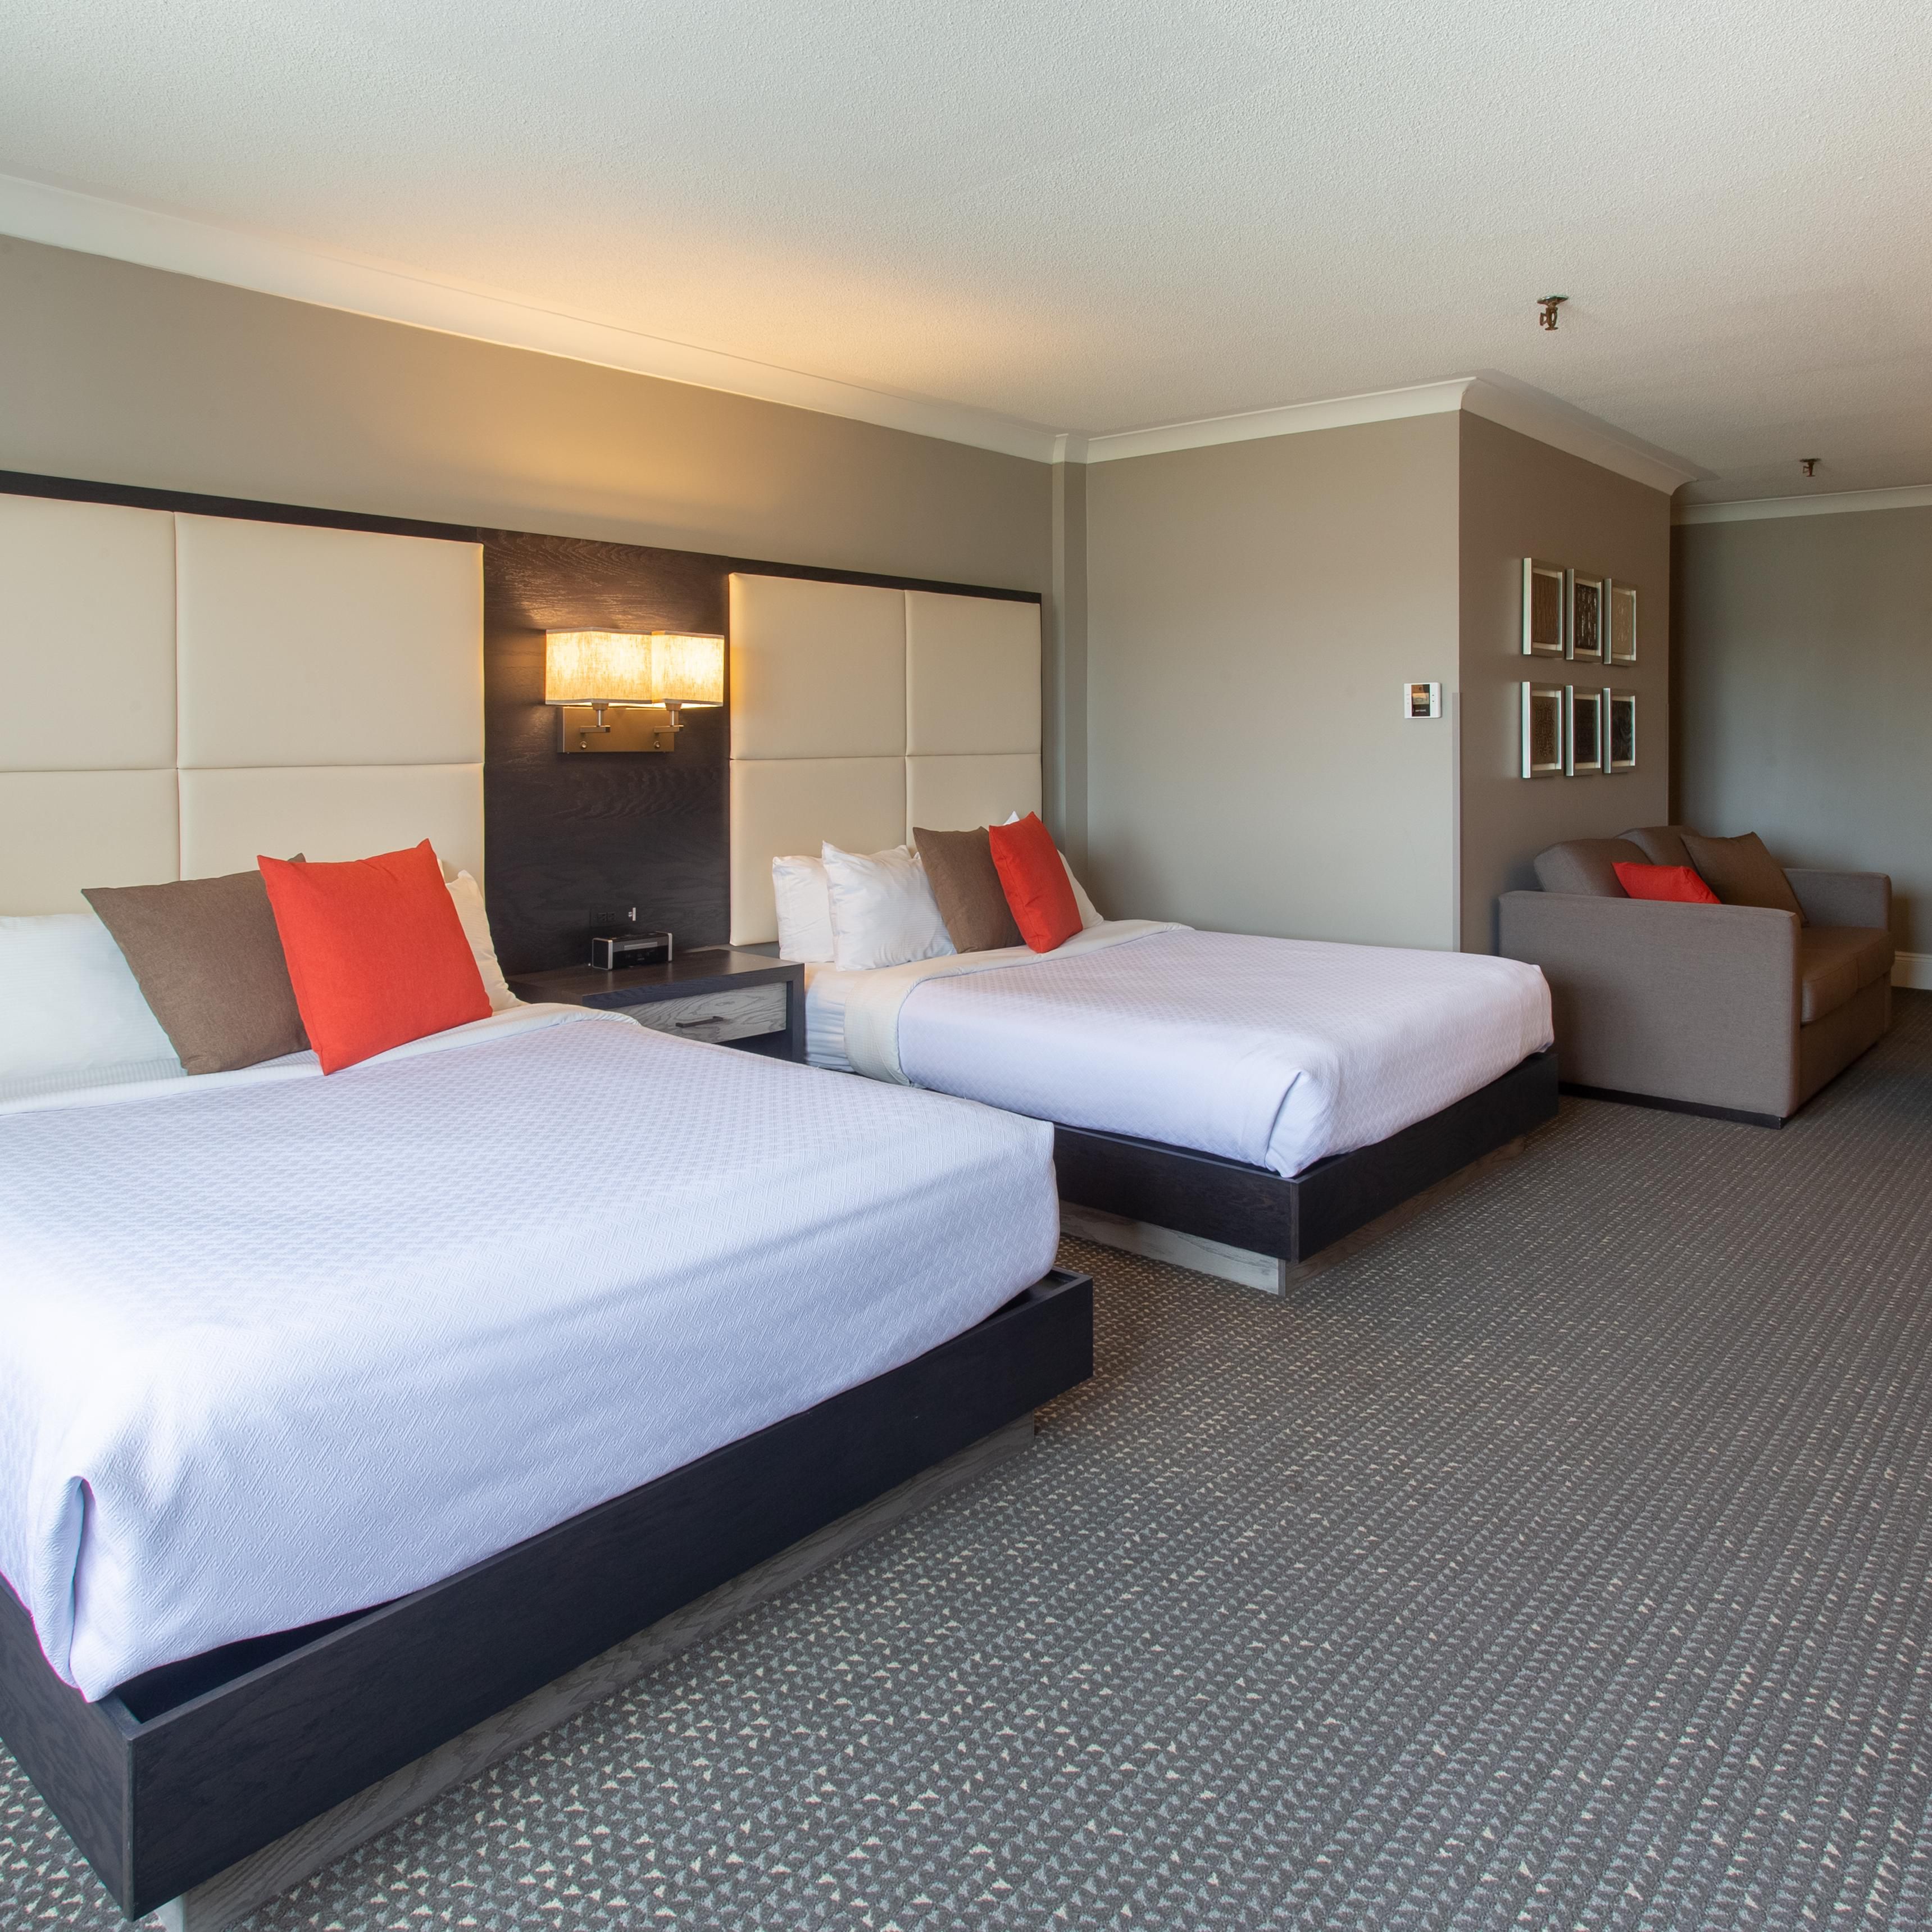 Our spacious rooms have everything you need for a great night